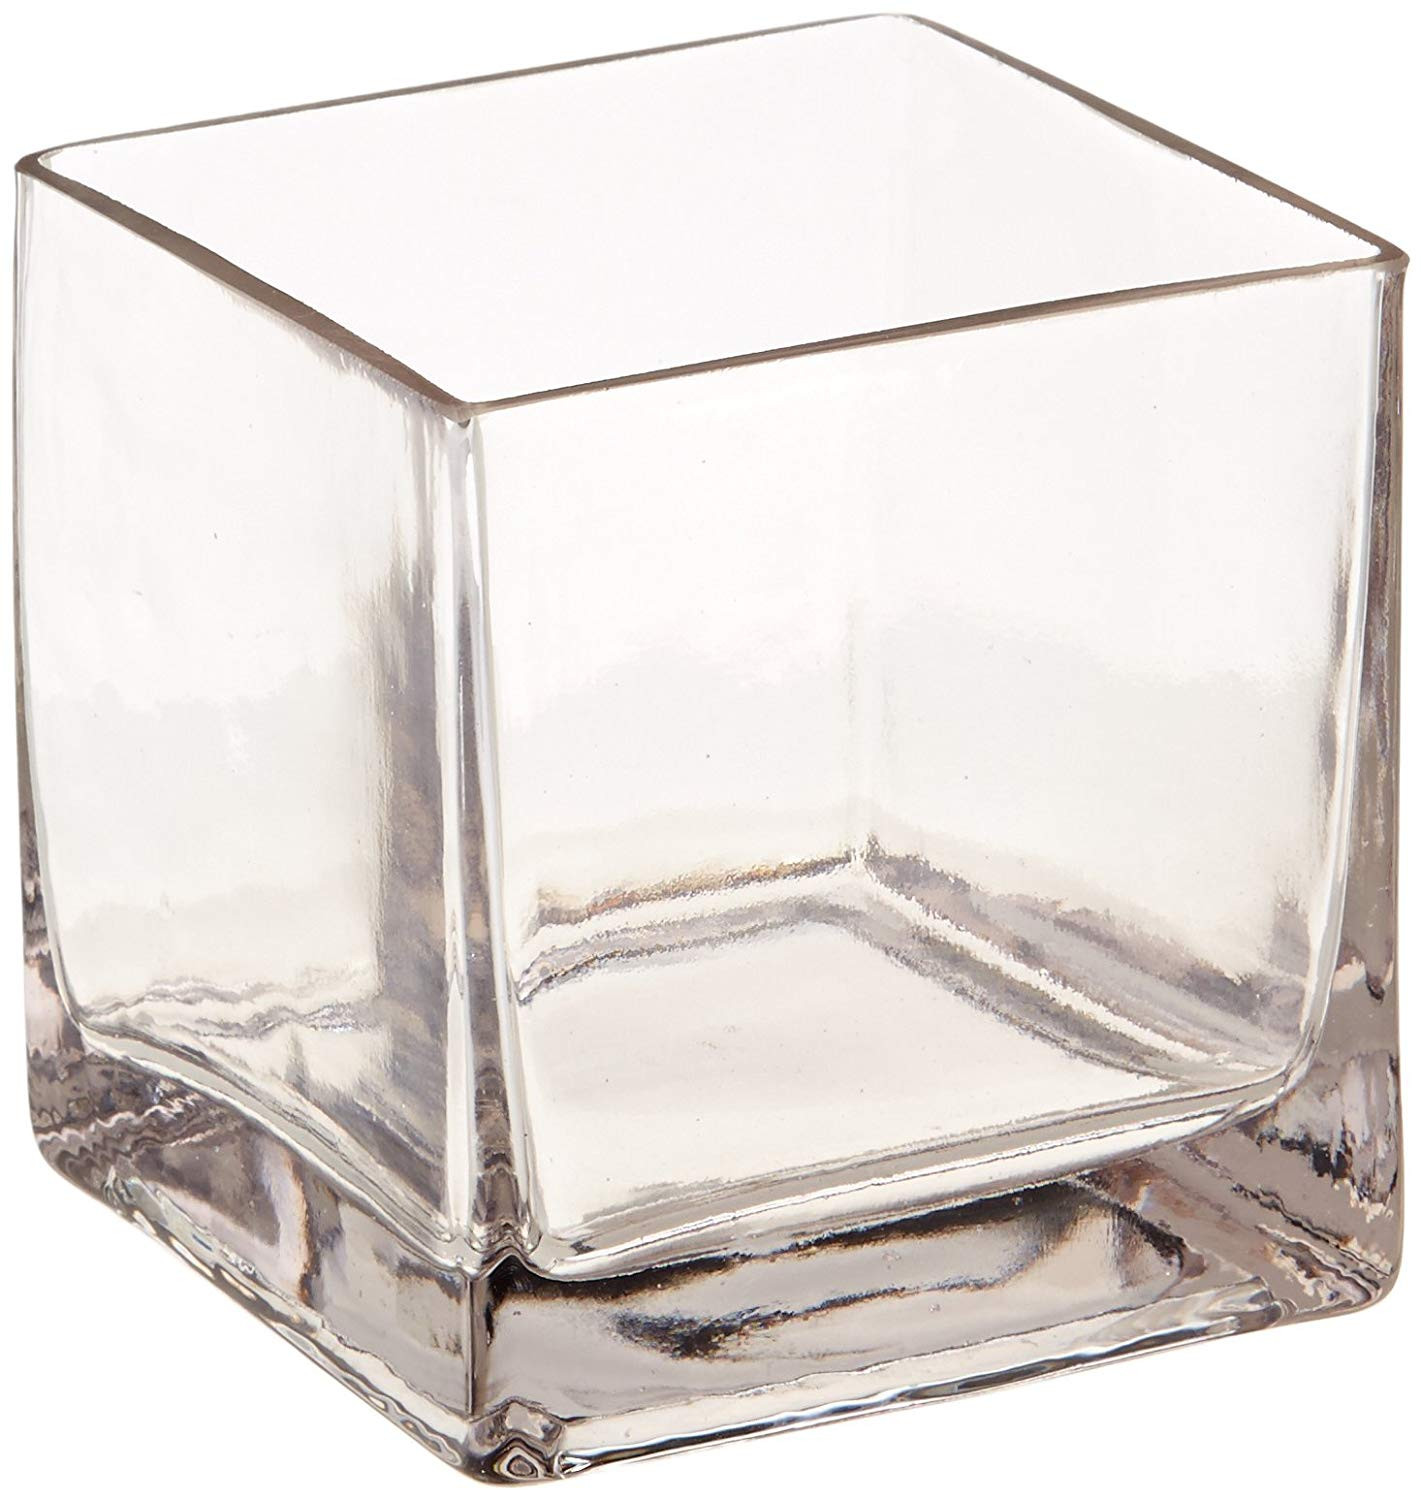 17 Ideal 24 Inch Square Vase 2024 free download 24 inch square vase of amazon com 12piece 4 square crystal clear glass vase home kitchen in 71 jezfmvnl sl1500